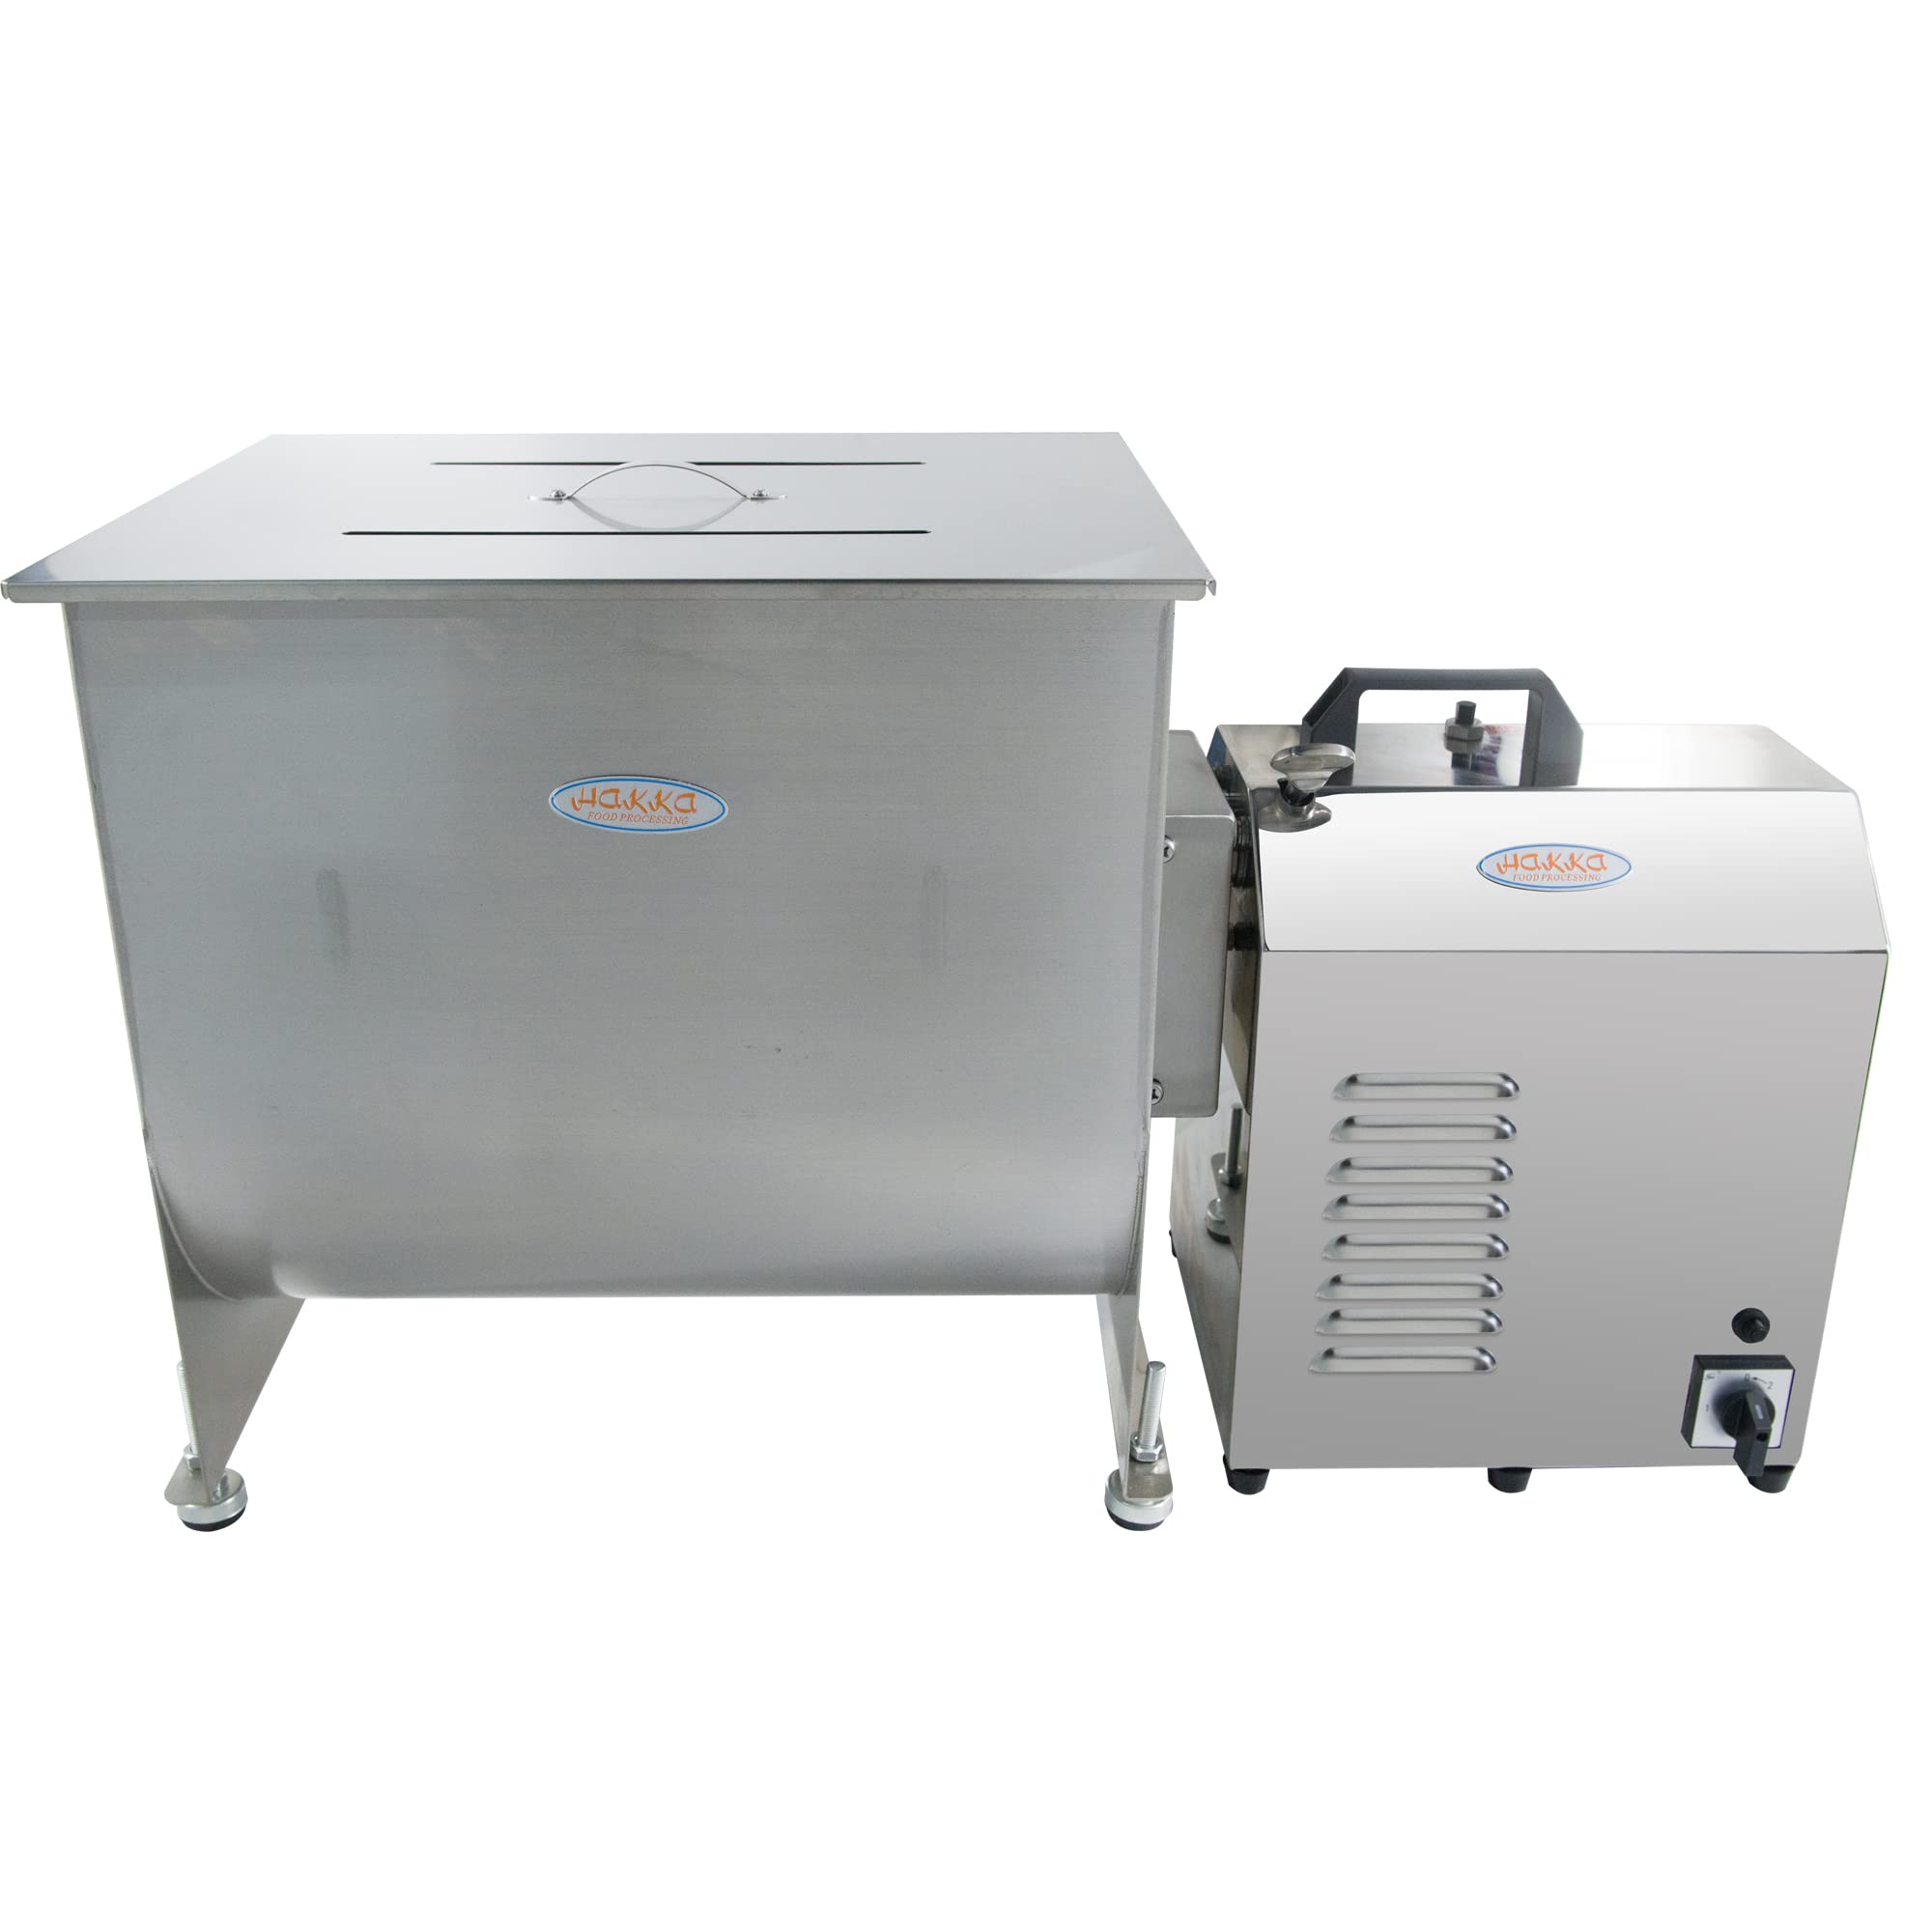 Hakka Electric 120-Pound/60-Liter Capacity Tank Stainless Steel Meat Mixers (Mixing Maximum 90-Pound for Meat)